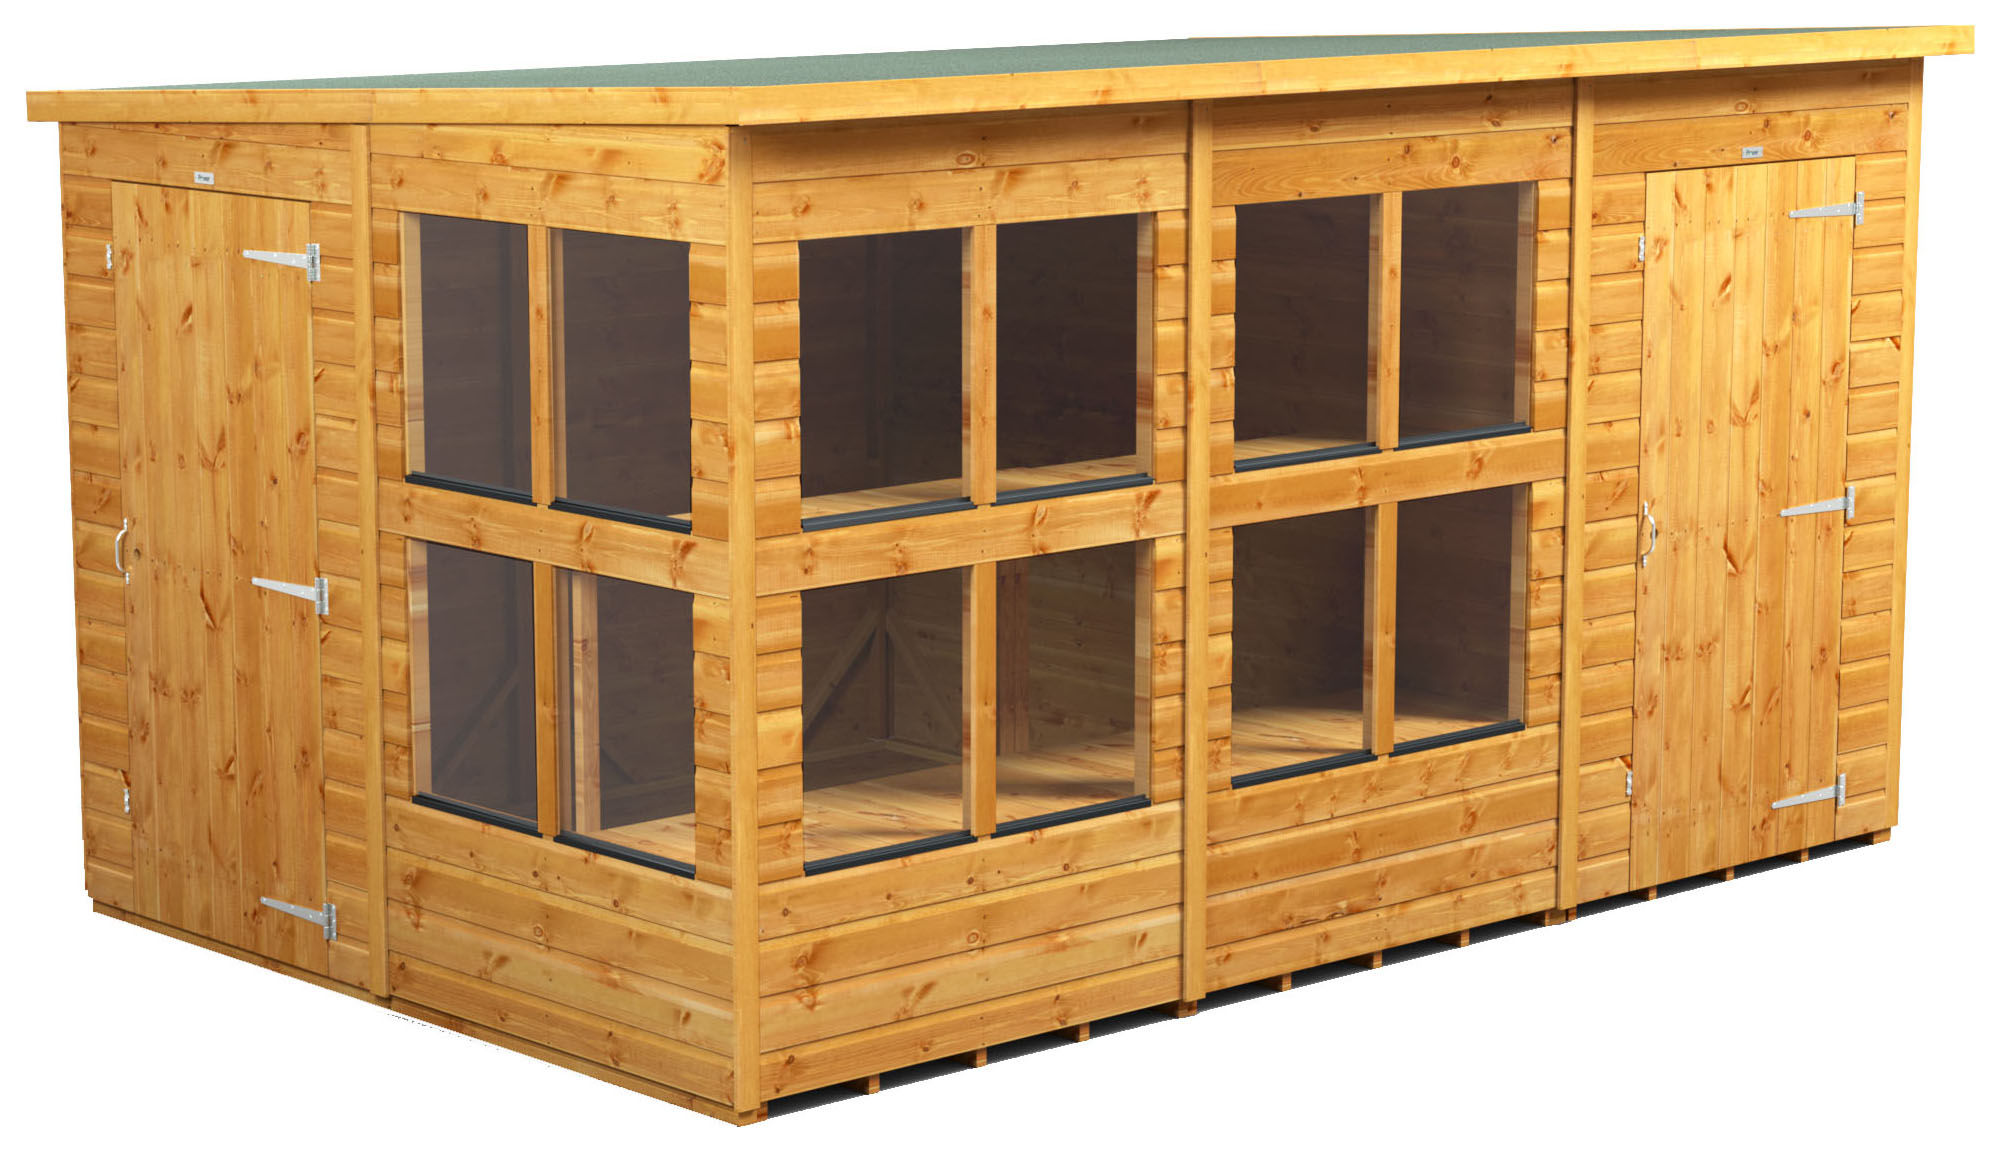 Power Sheds 12 x 8ft Pent Shiplap Dip Treated Potting Shed - Including Side Store